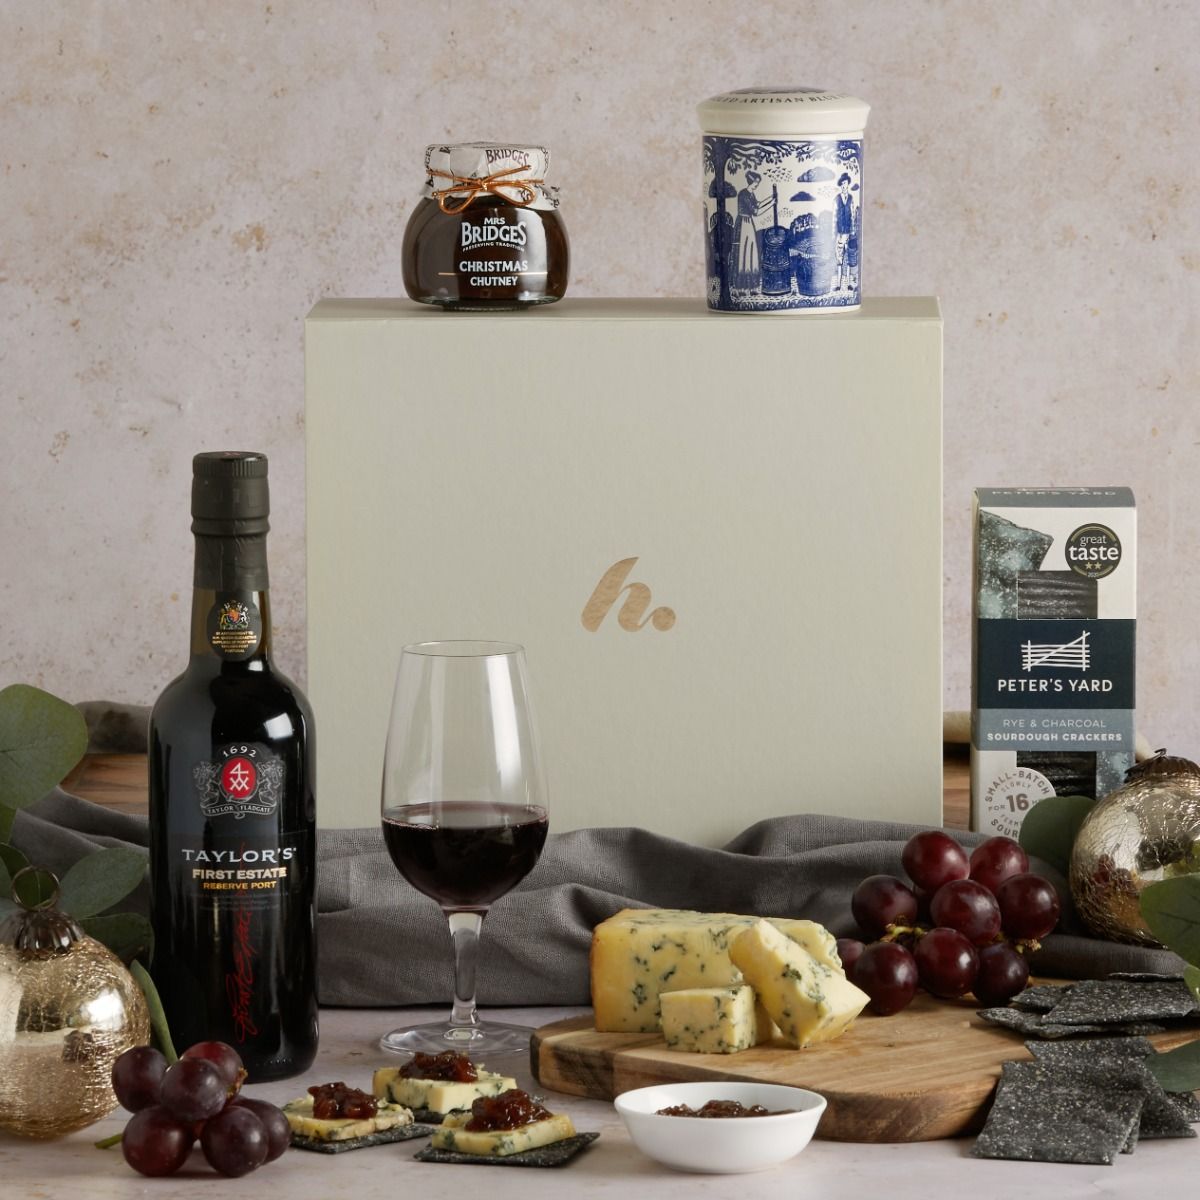 The Port & Stilton Christmas Gift Box with the contents on display, including ceramic pot of stilton and a signature cream gift box